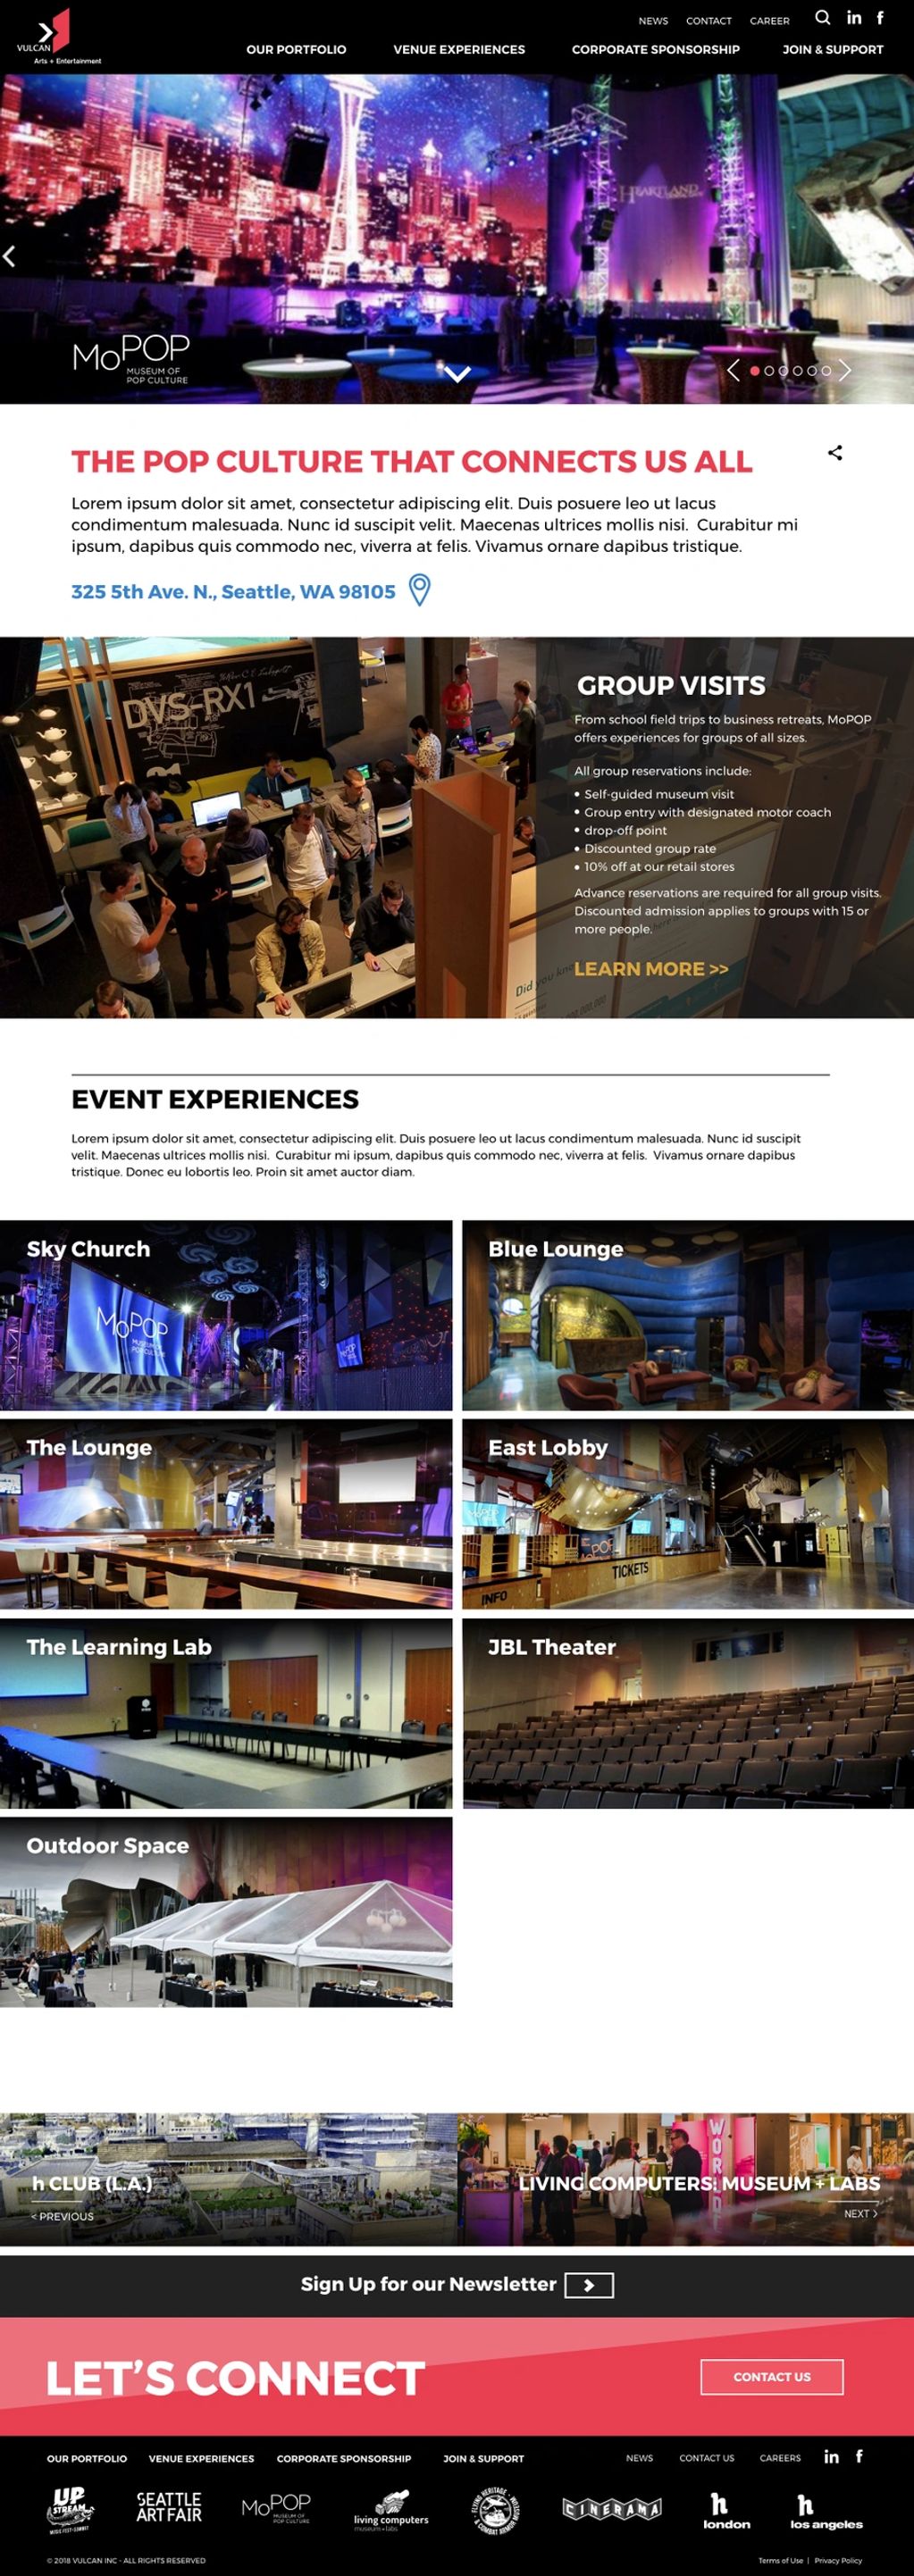 MoPop interior: Sky Church, Blue Lounge, The Lounge, East Lobby, The Learning Lab, and JBL Theater.